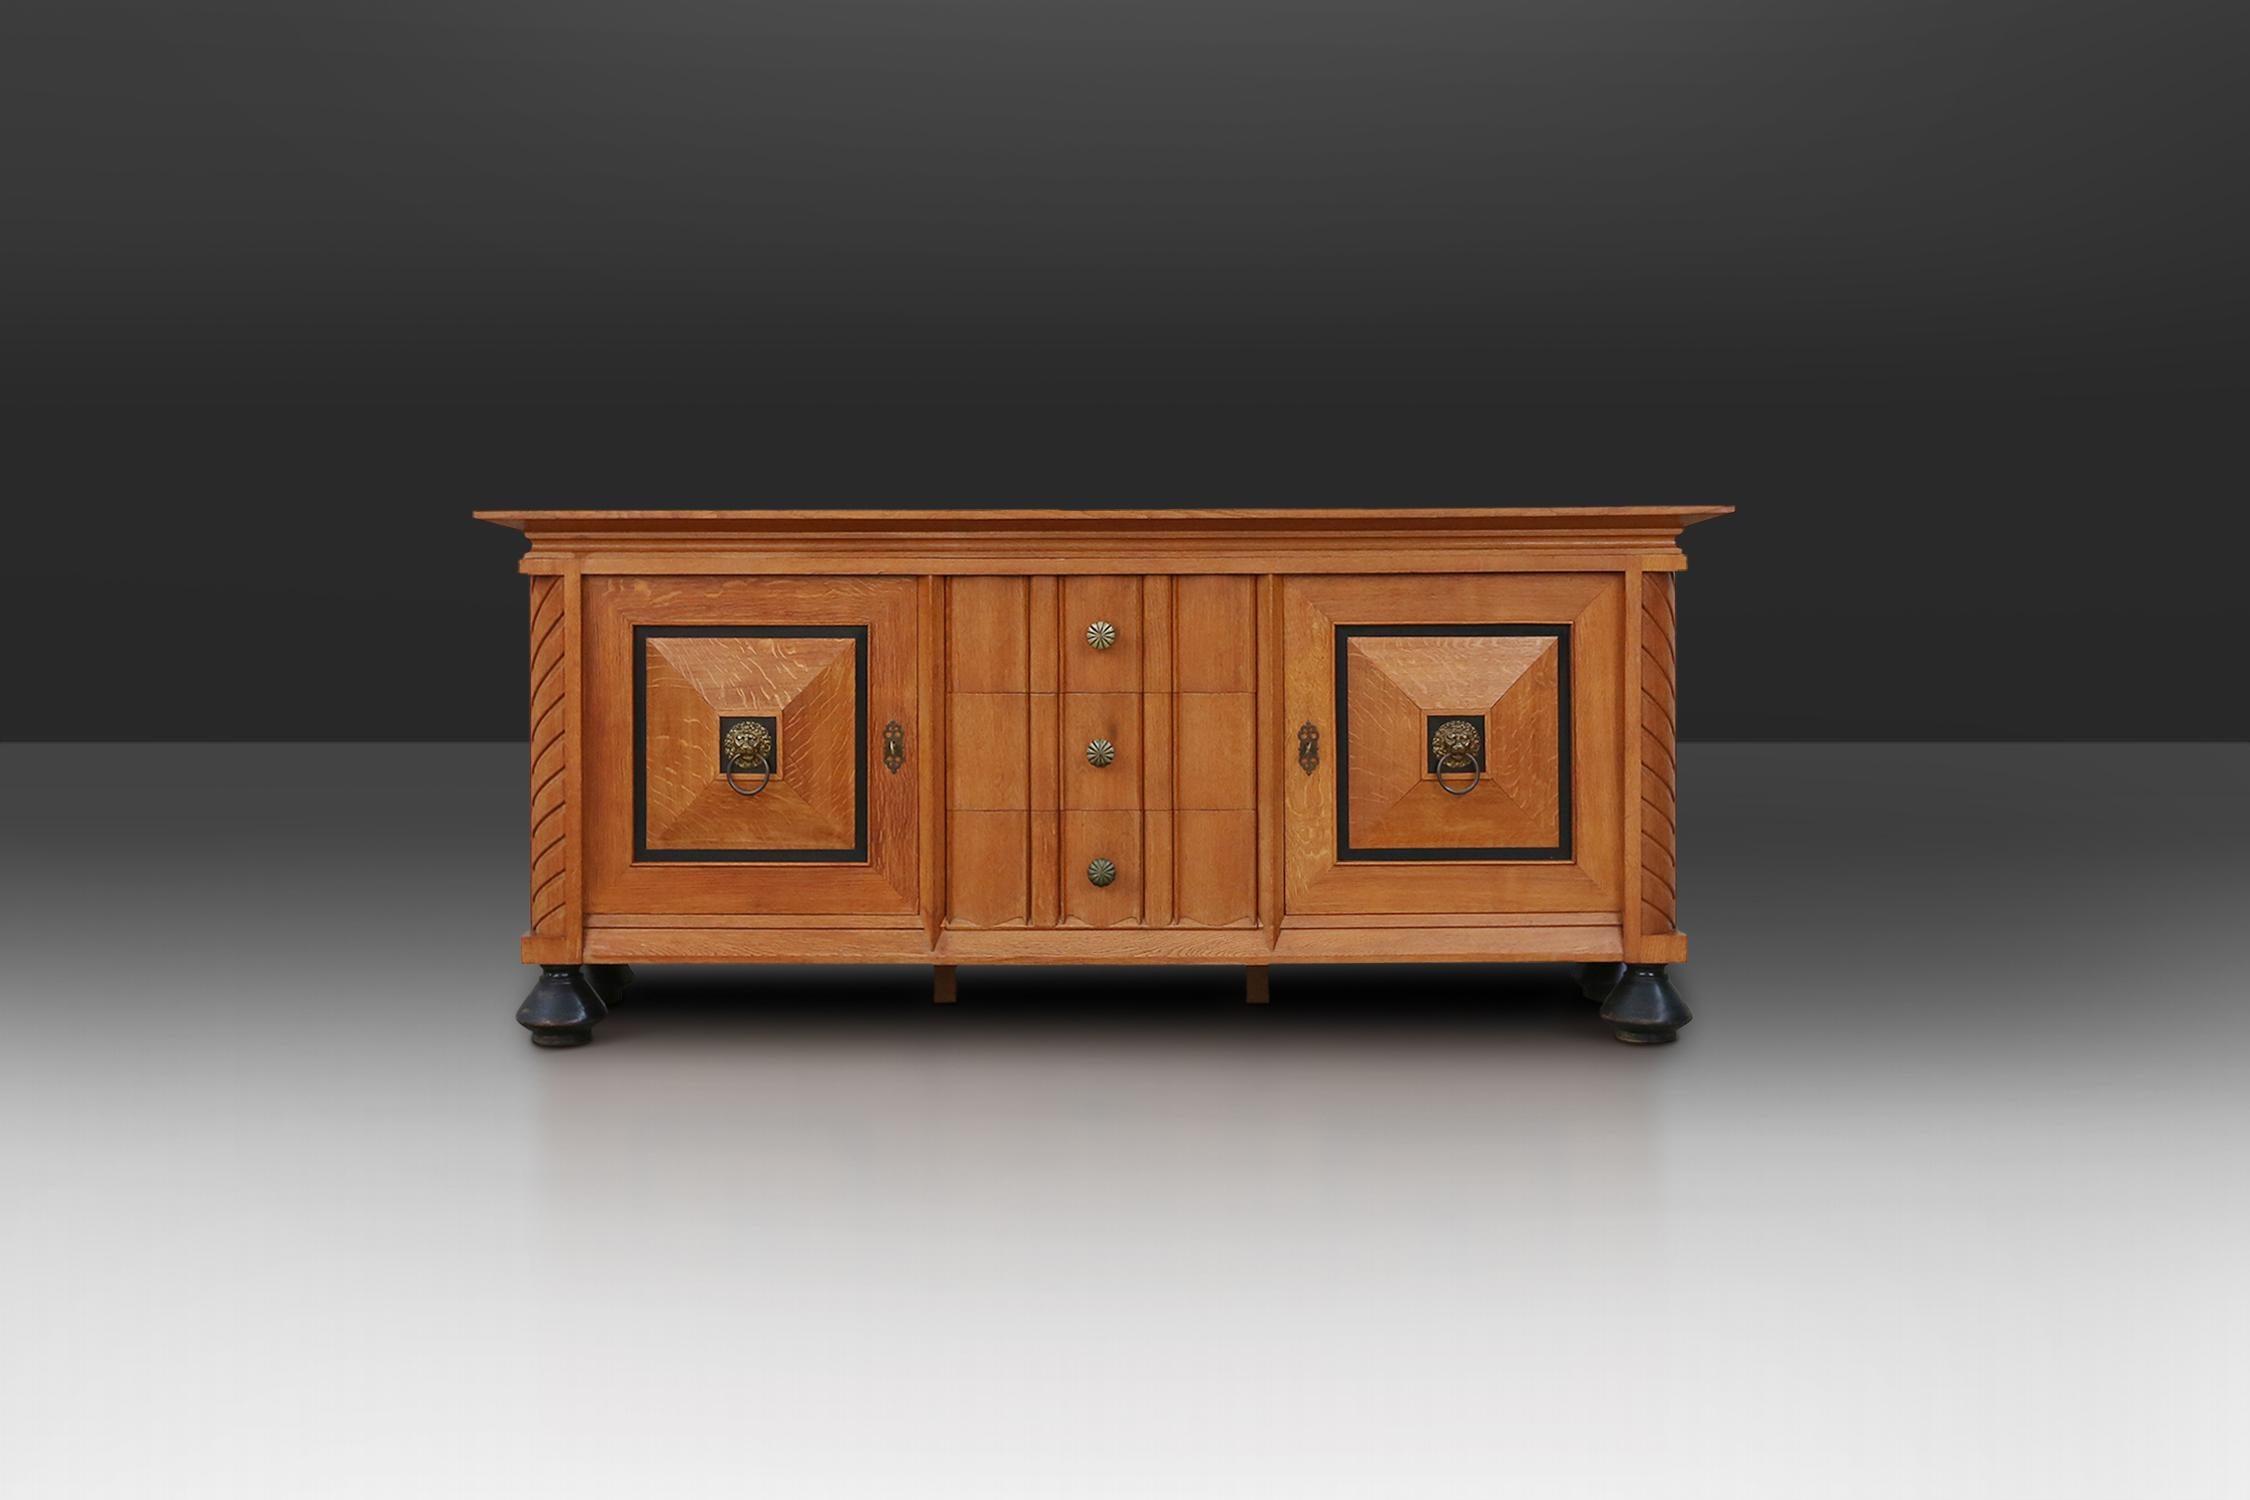 Robust sideboard features two square door panels with a brass lion head. in the middle three large drawers with brass handles.

A beautiful detail that makes it such a well-designed piece, are the black round legs. The black details are also